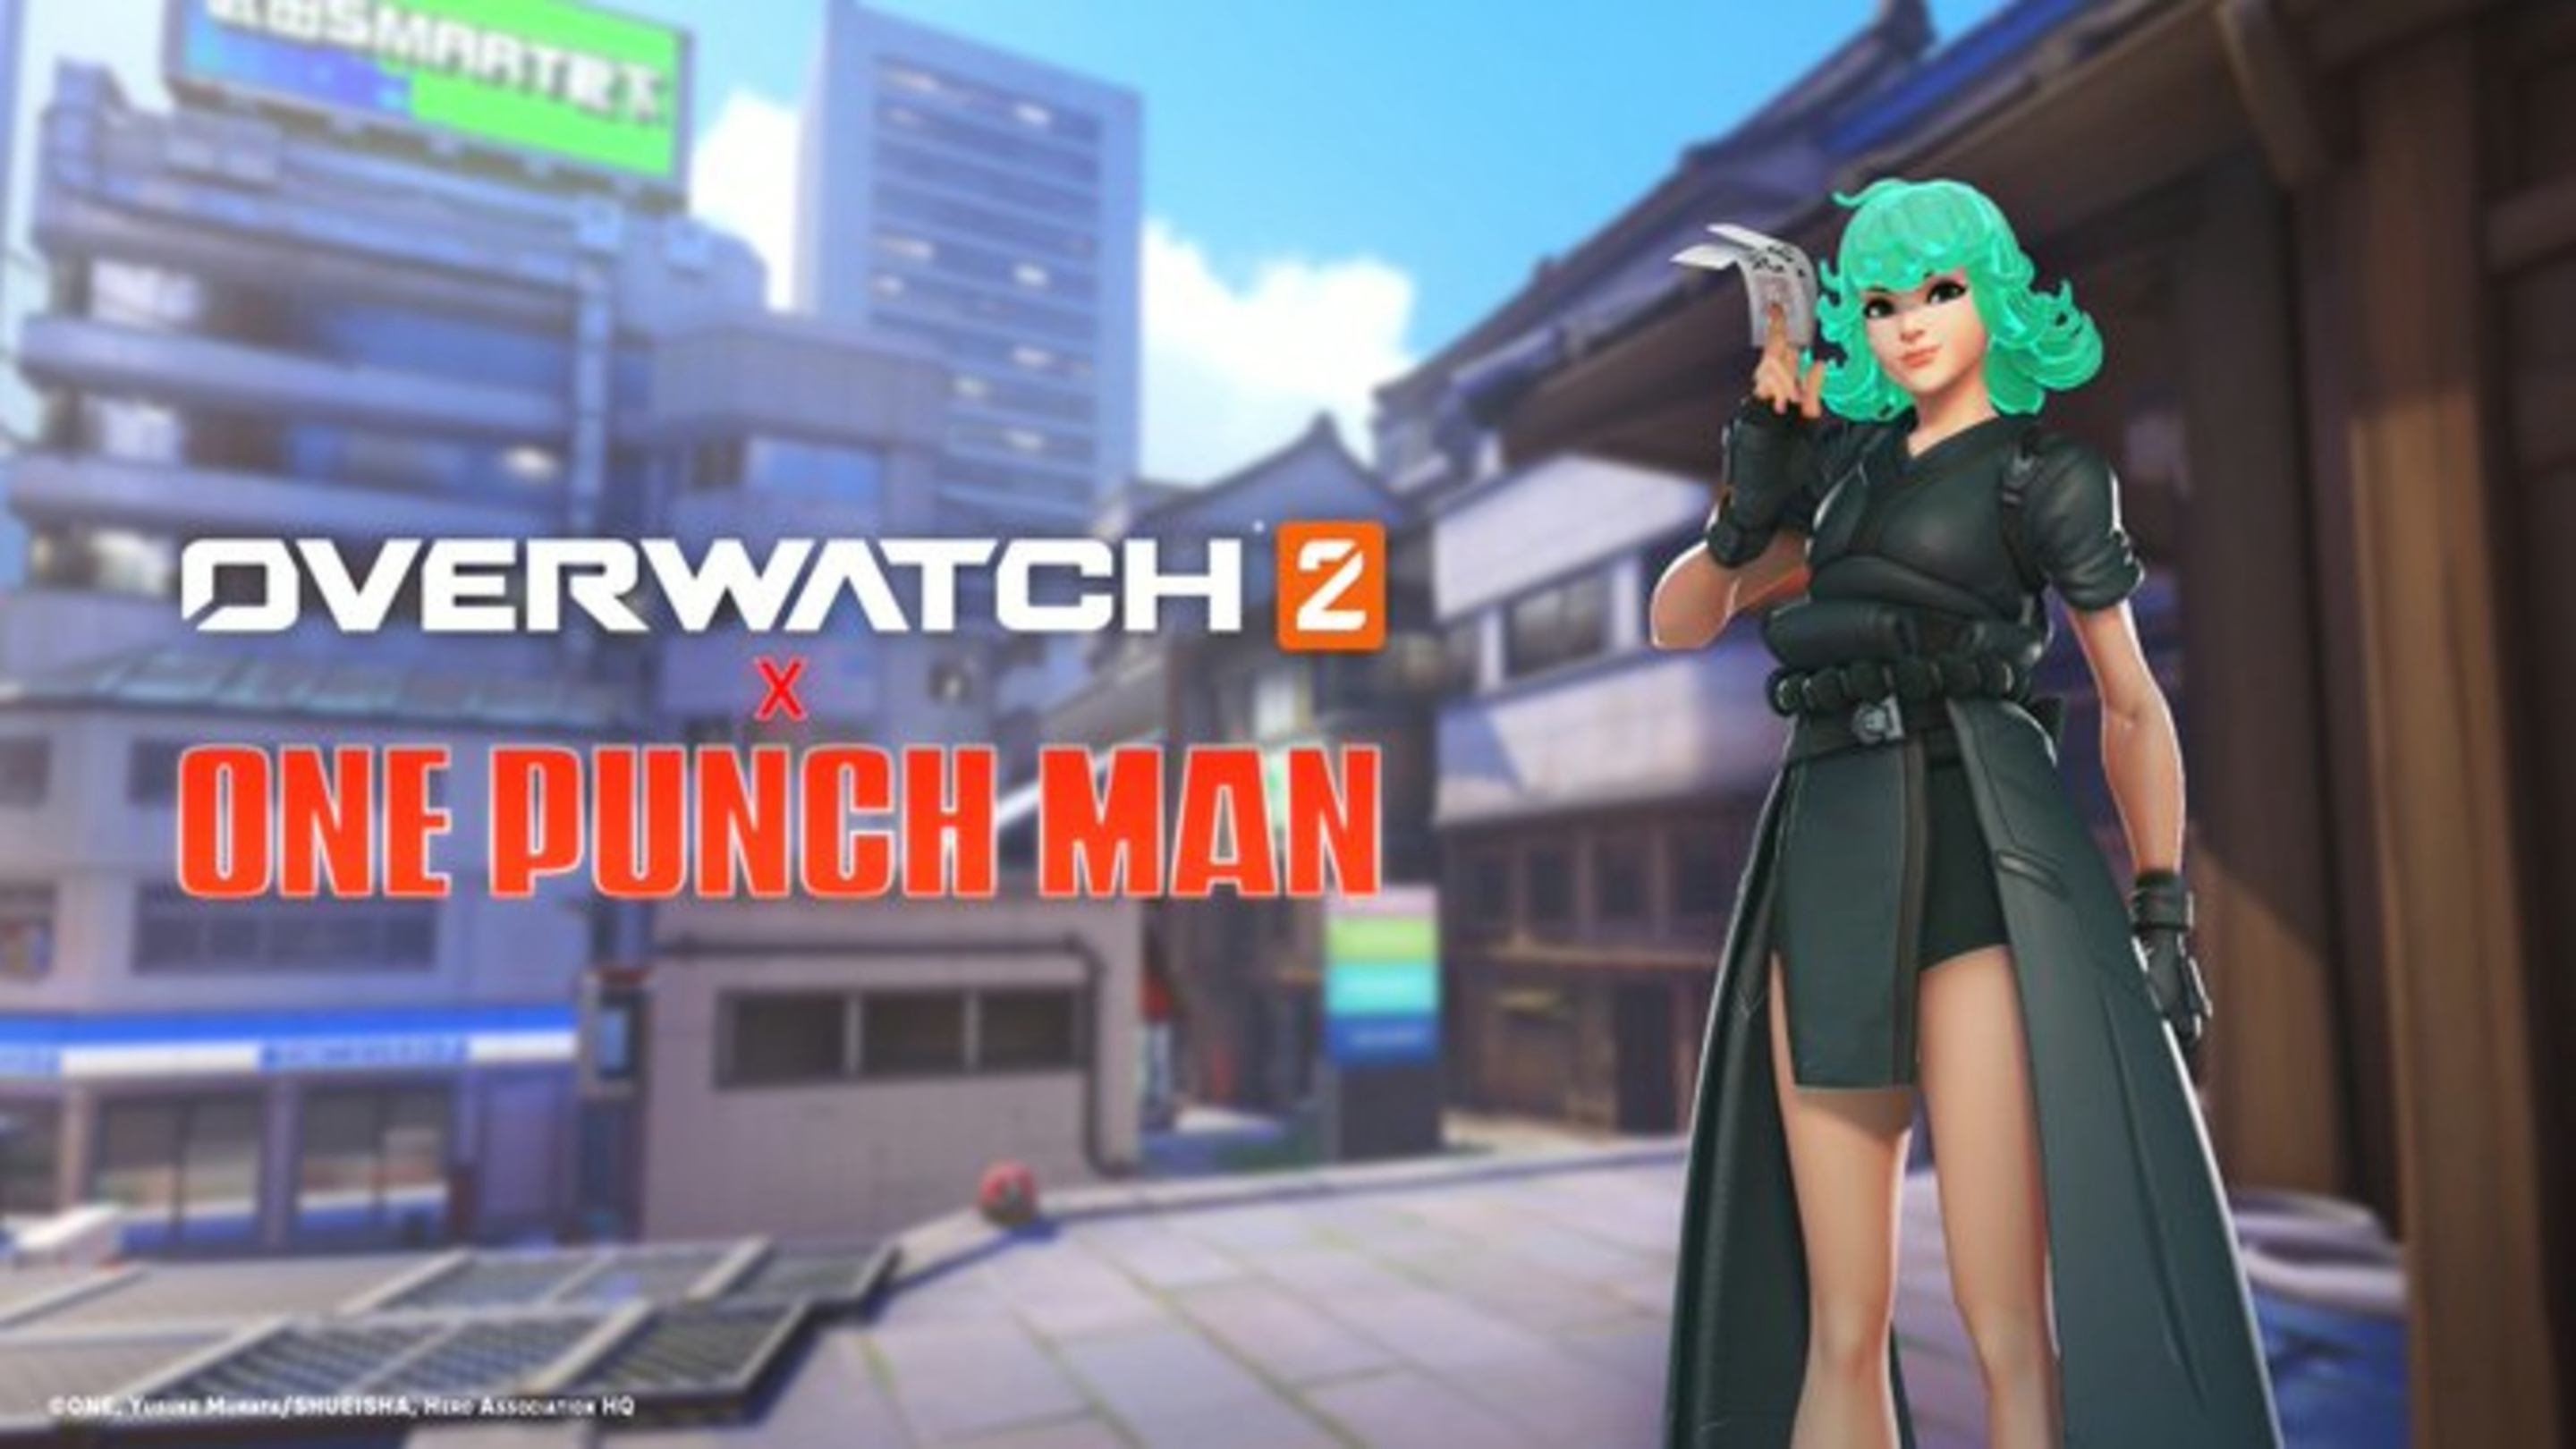 Overwatch 2 Season 3 Will Have One Punch Man Skins - Siliconera